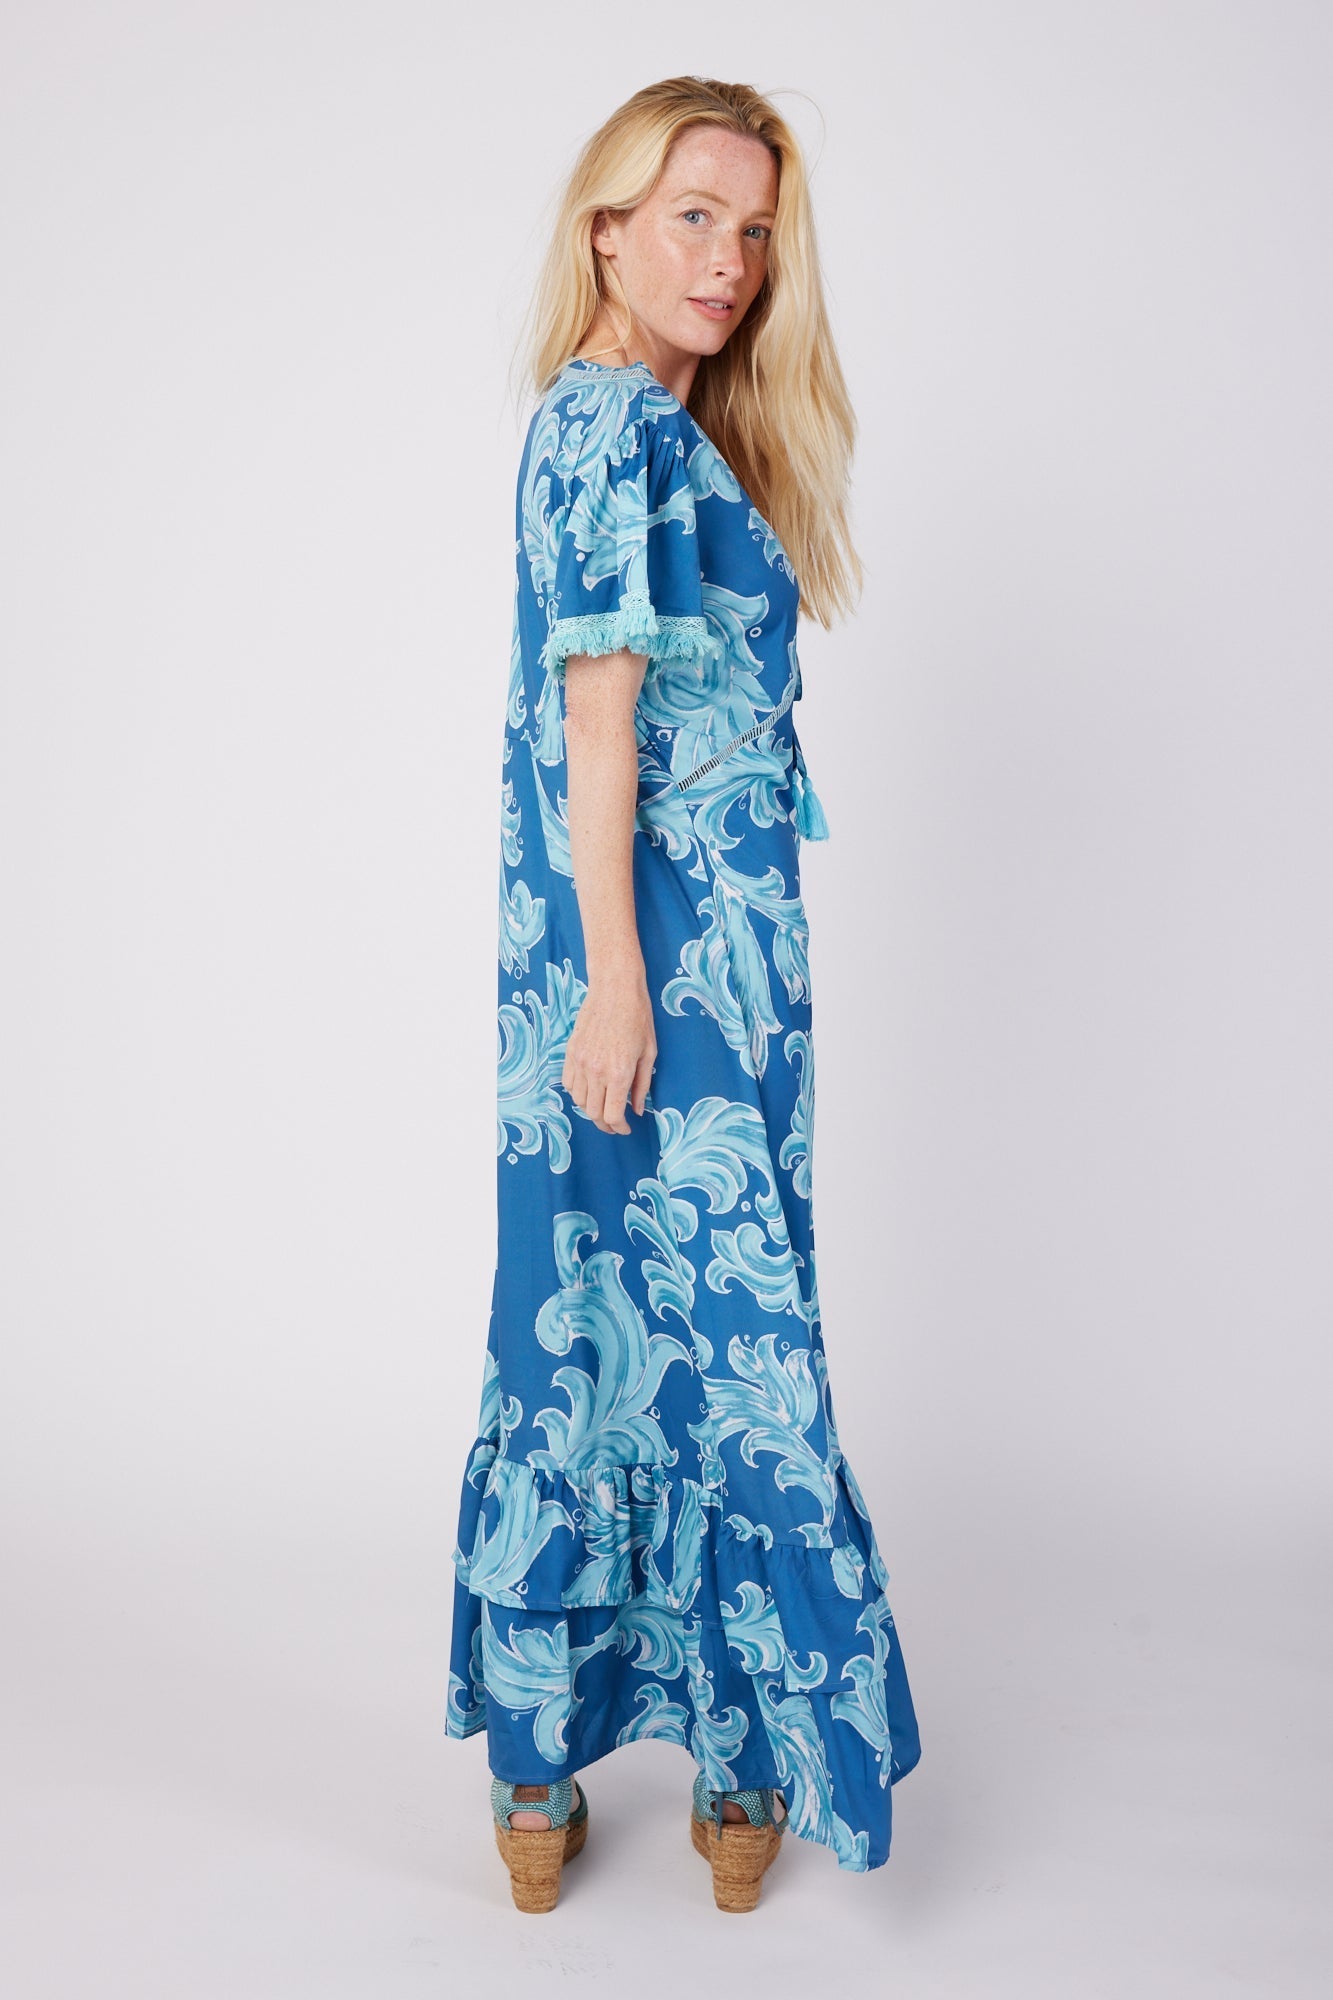 ModaPosa Brigida Short Sleeve V-Neck Maxi Dress with Fringe Trim in in Deep Blue Baroque . Discover women's resort dresses and lifestyle clothing inspired by the Mediterranean. Free worldwide shipping available!